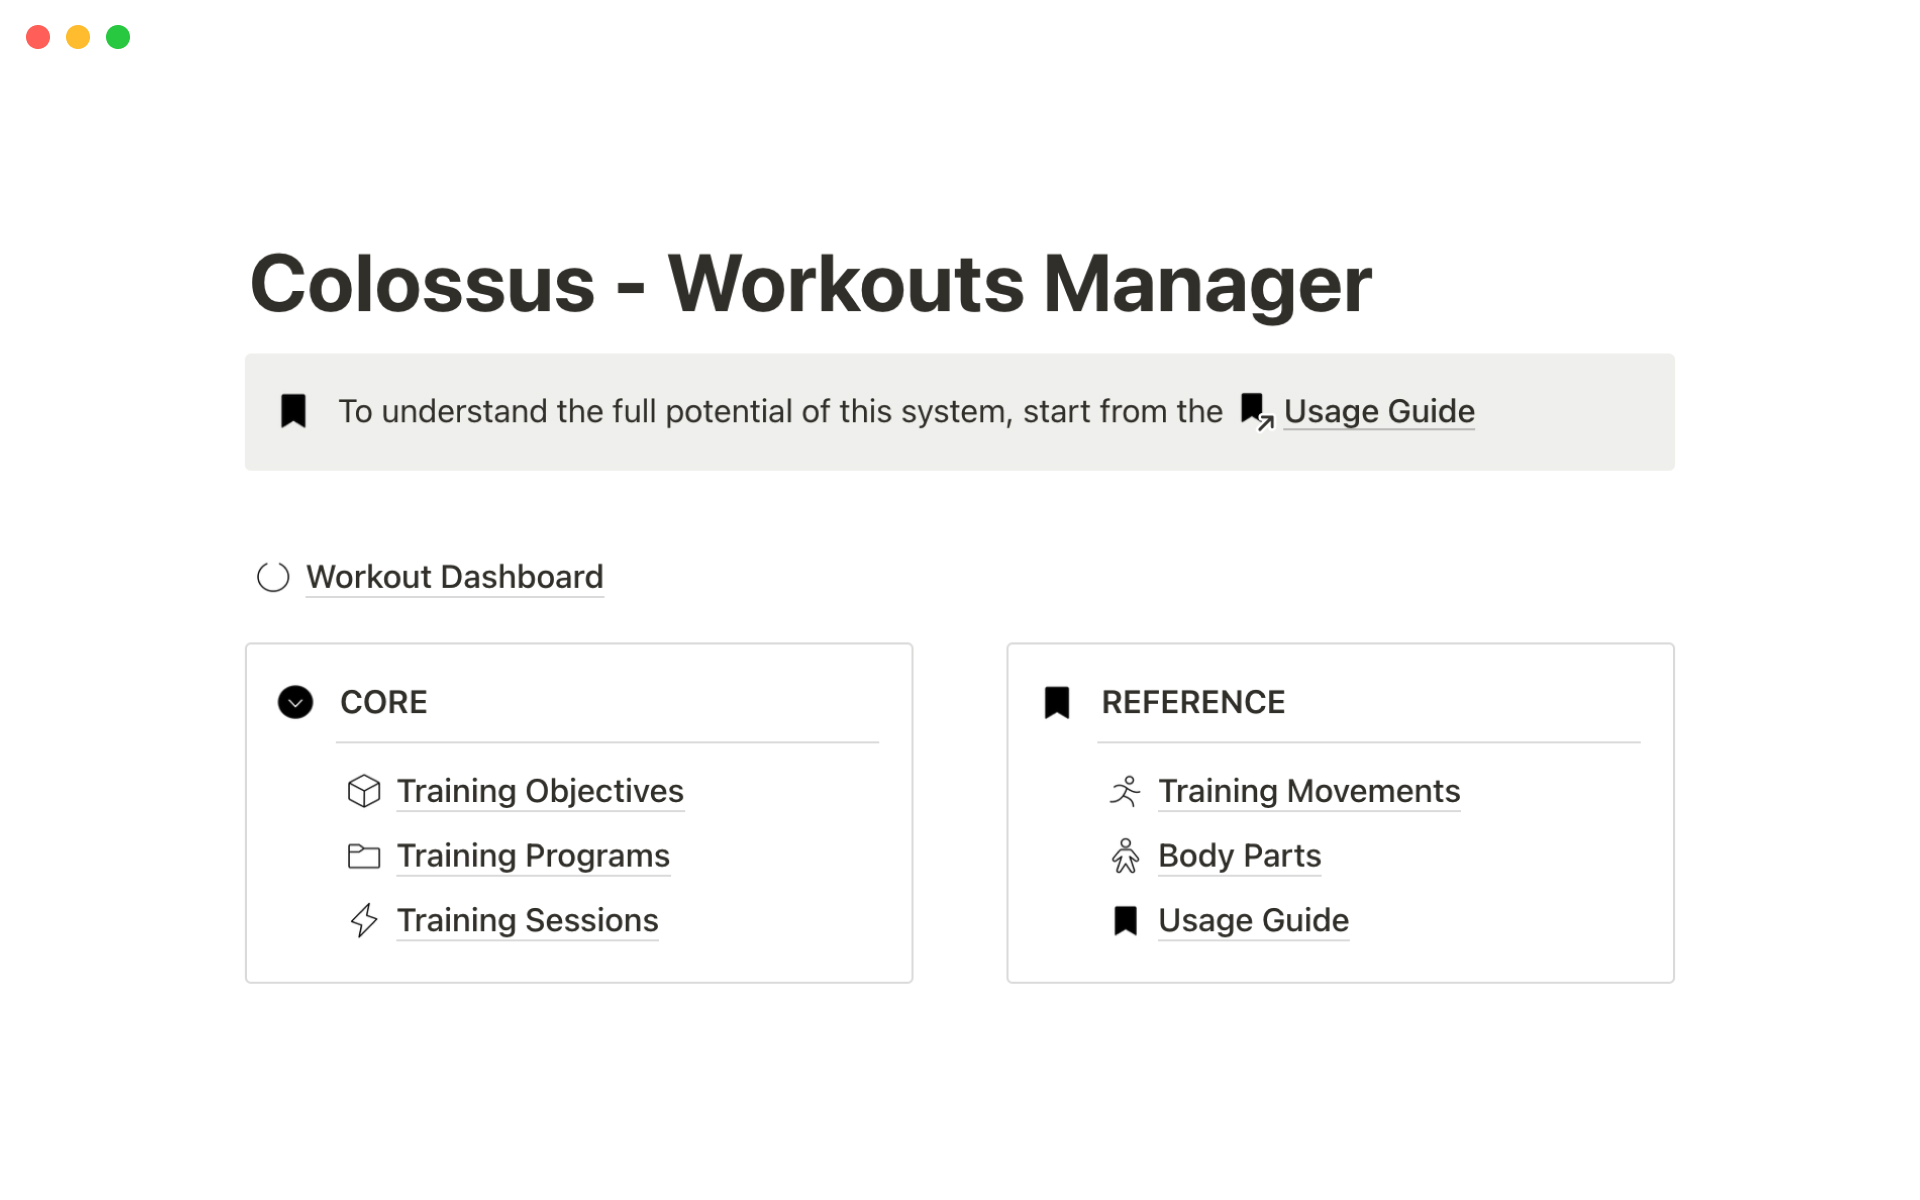 Define your fitness goals, set up workout programs, and track workout sessions all in one place.